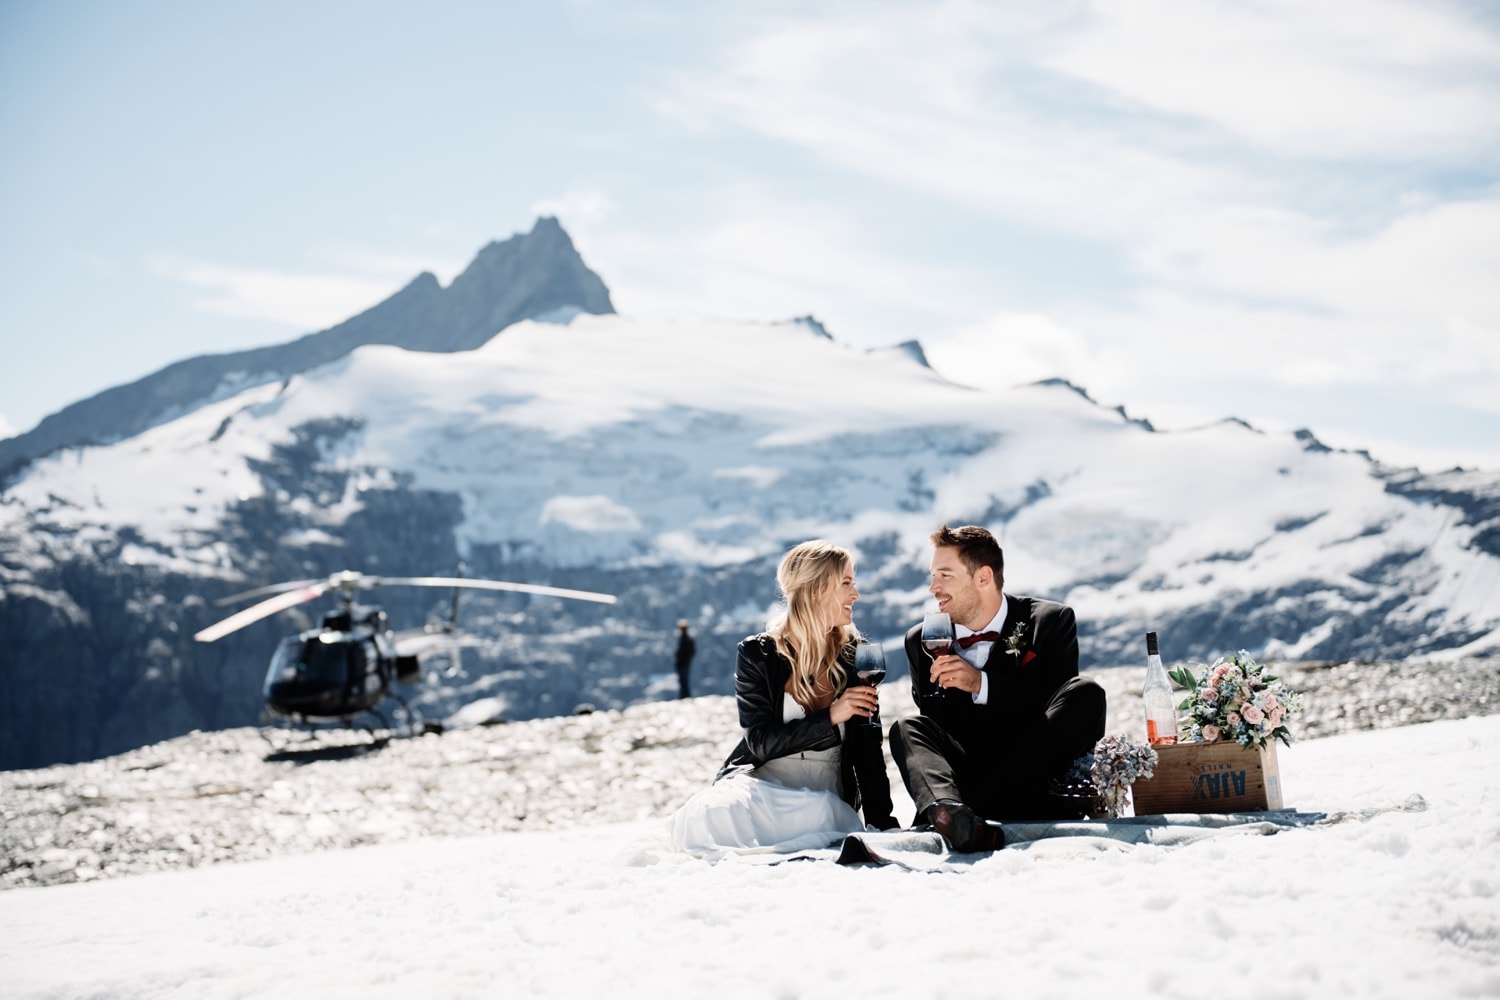 Maggie and Darren's winter wedding photo with a helicopter backdrop.